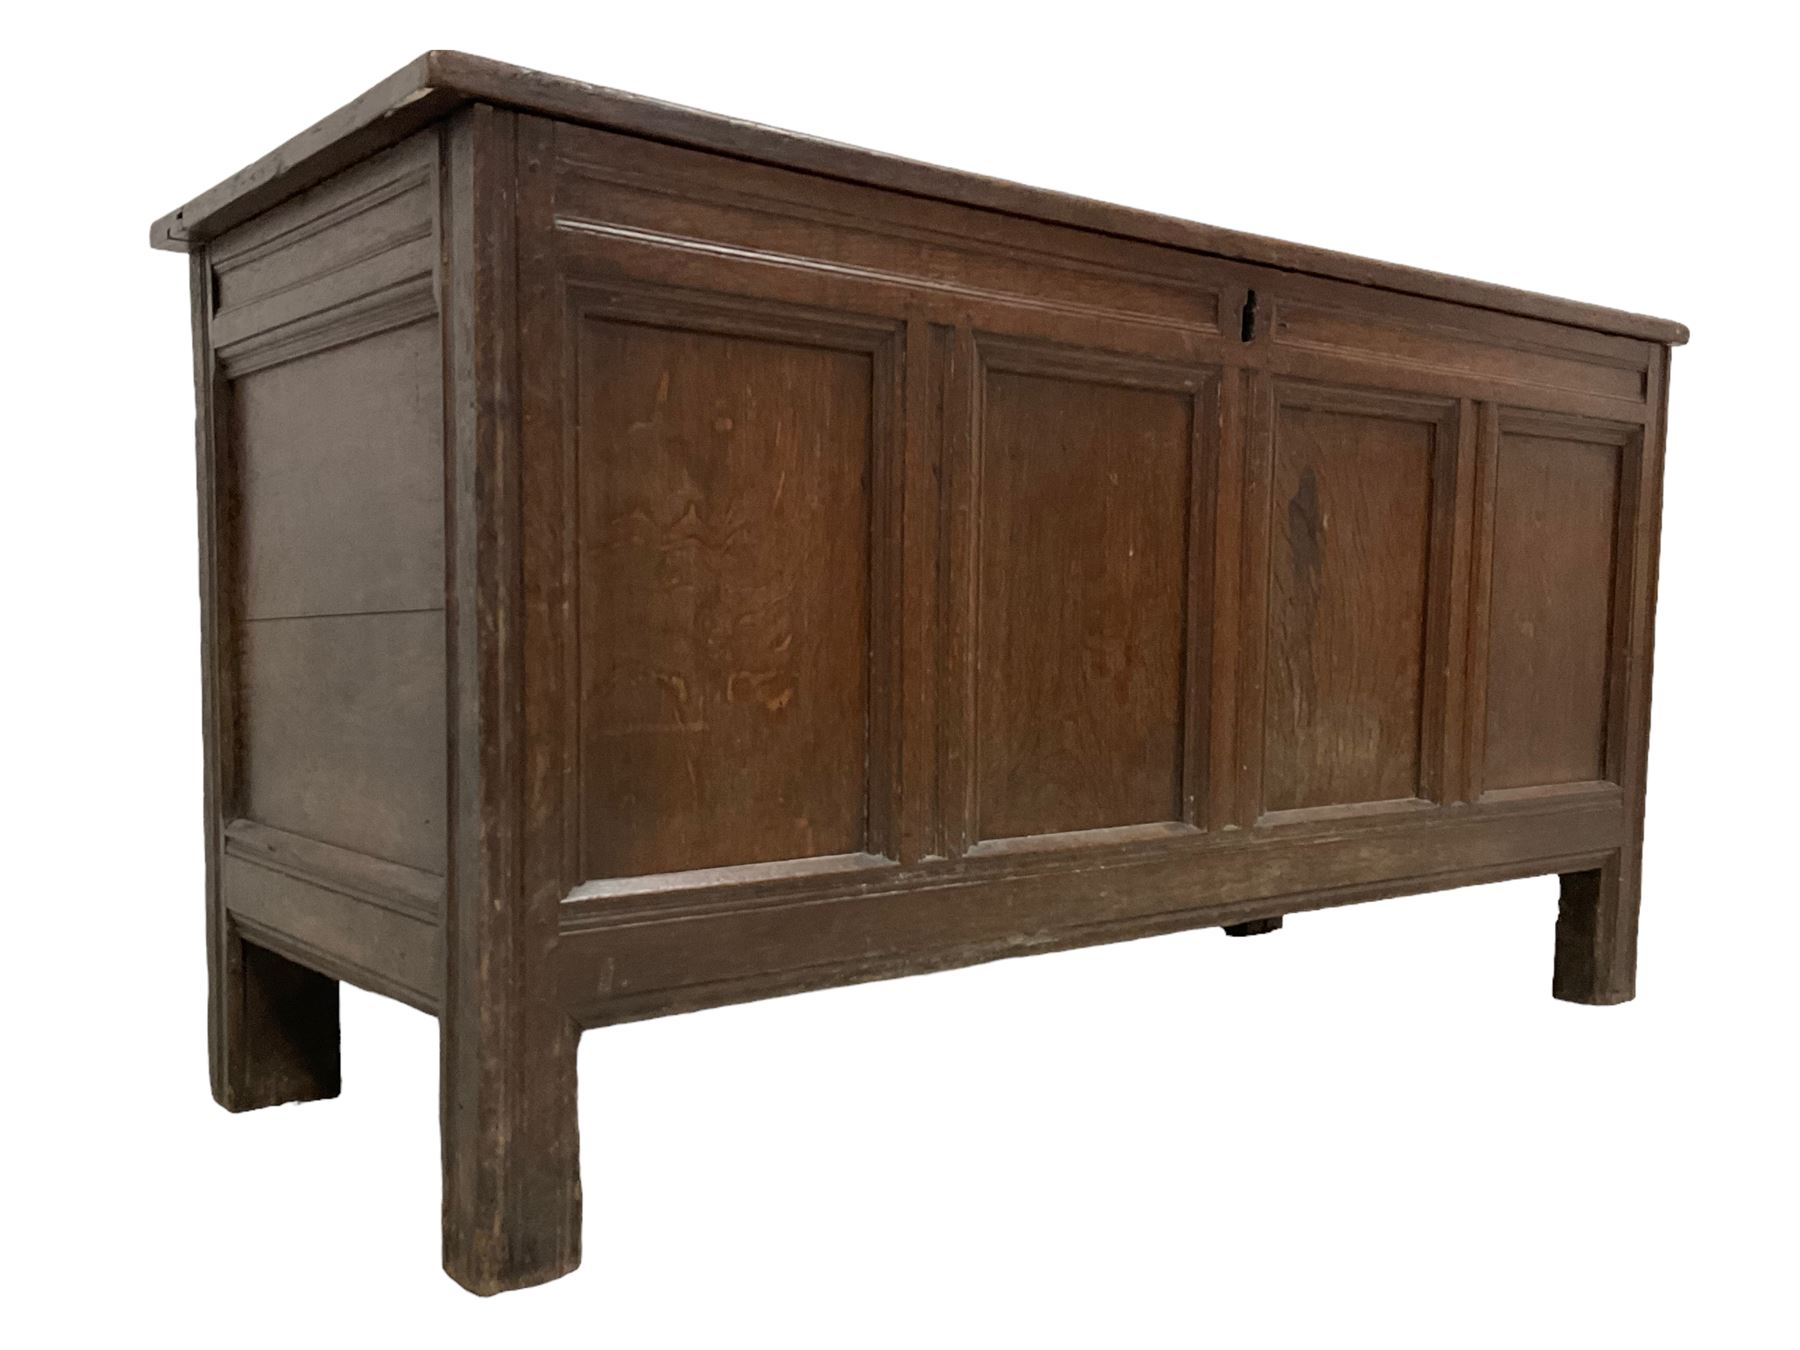 18th century oak coffer or chest - Image 2 of 4